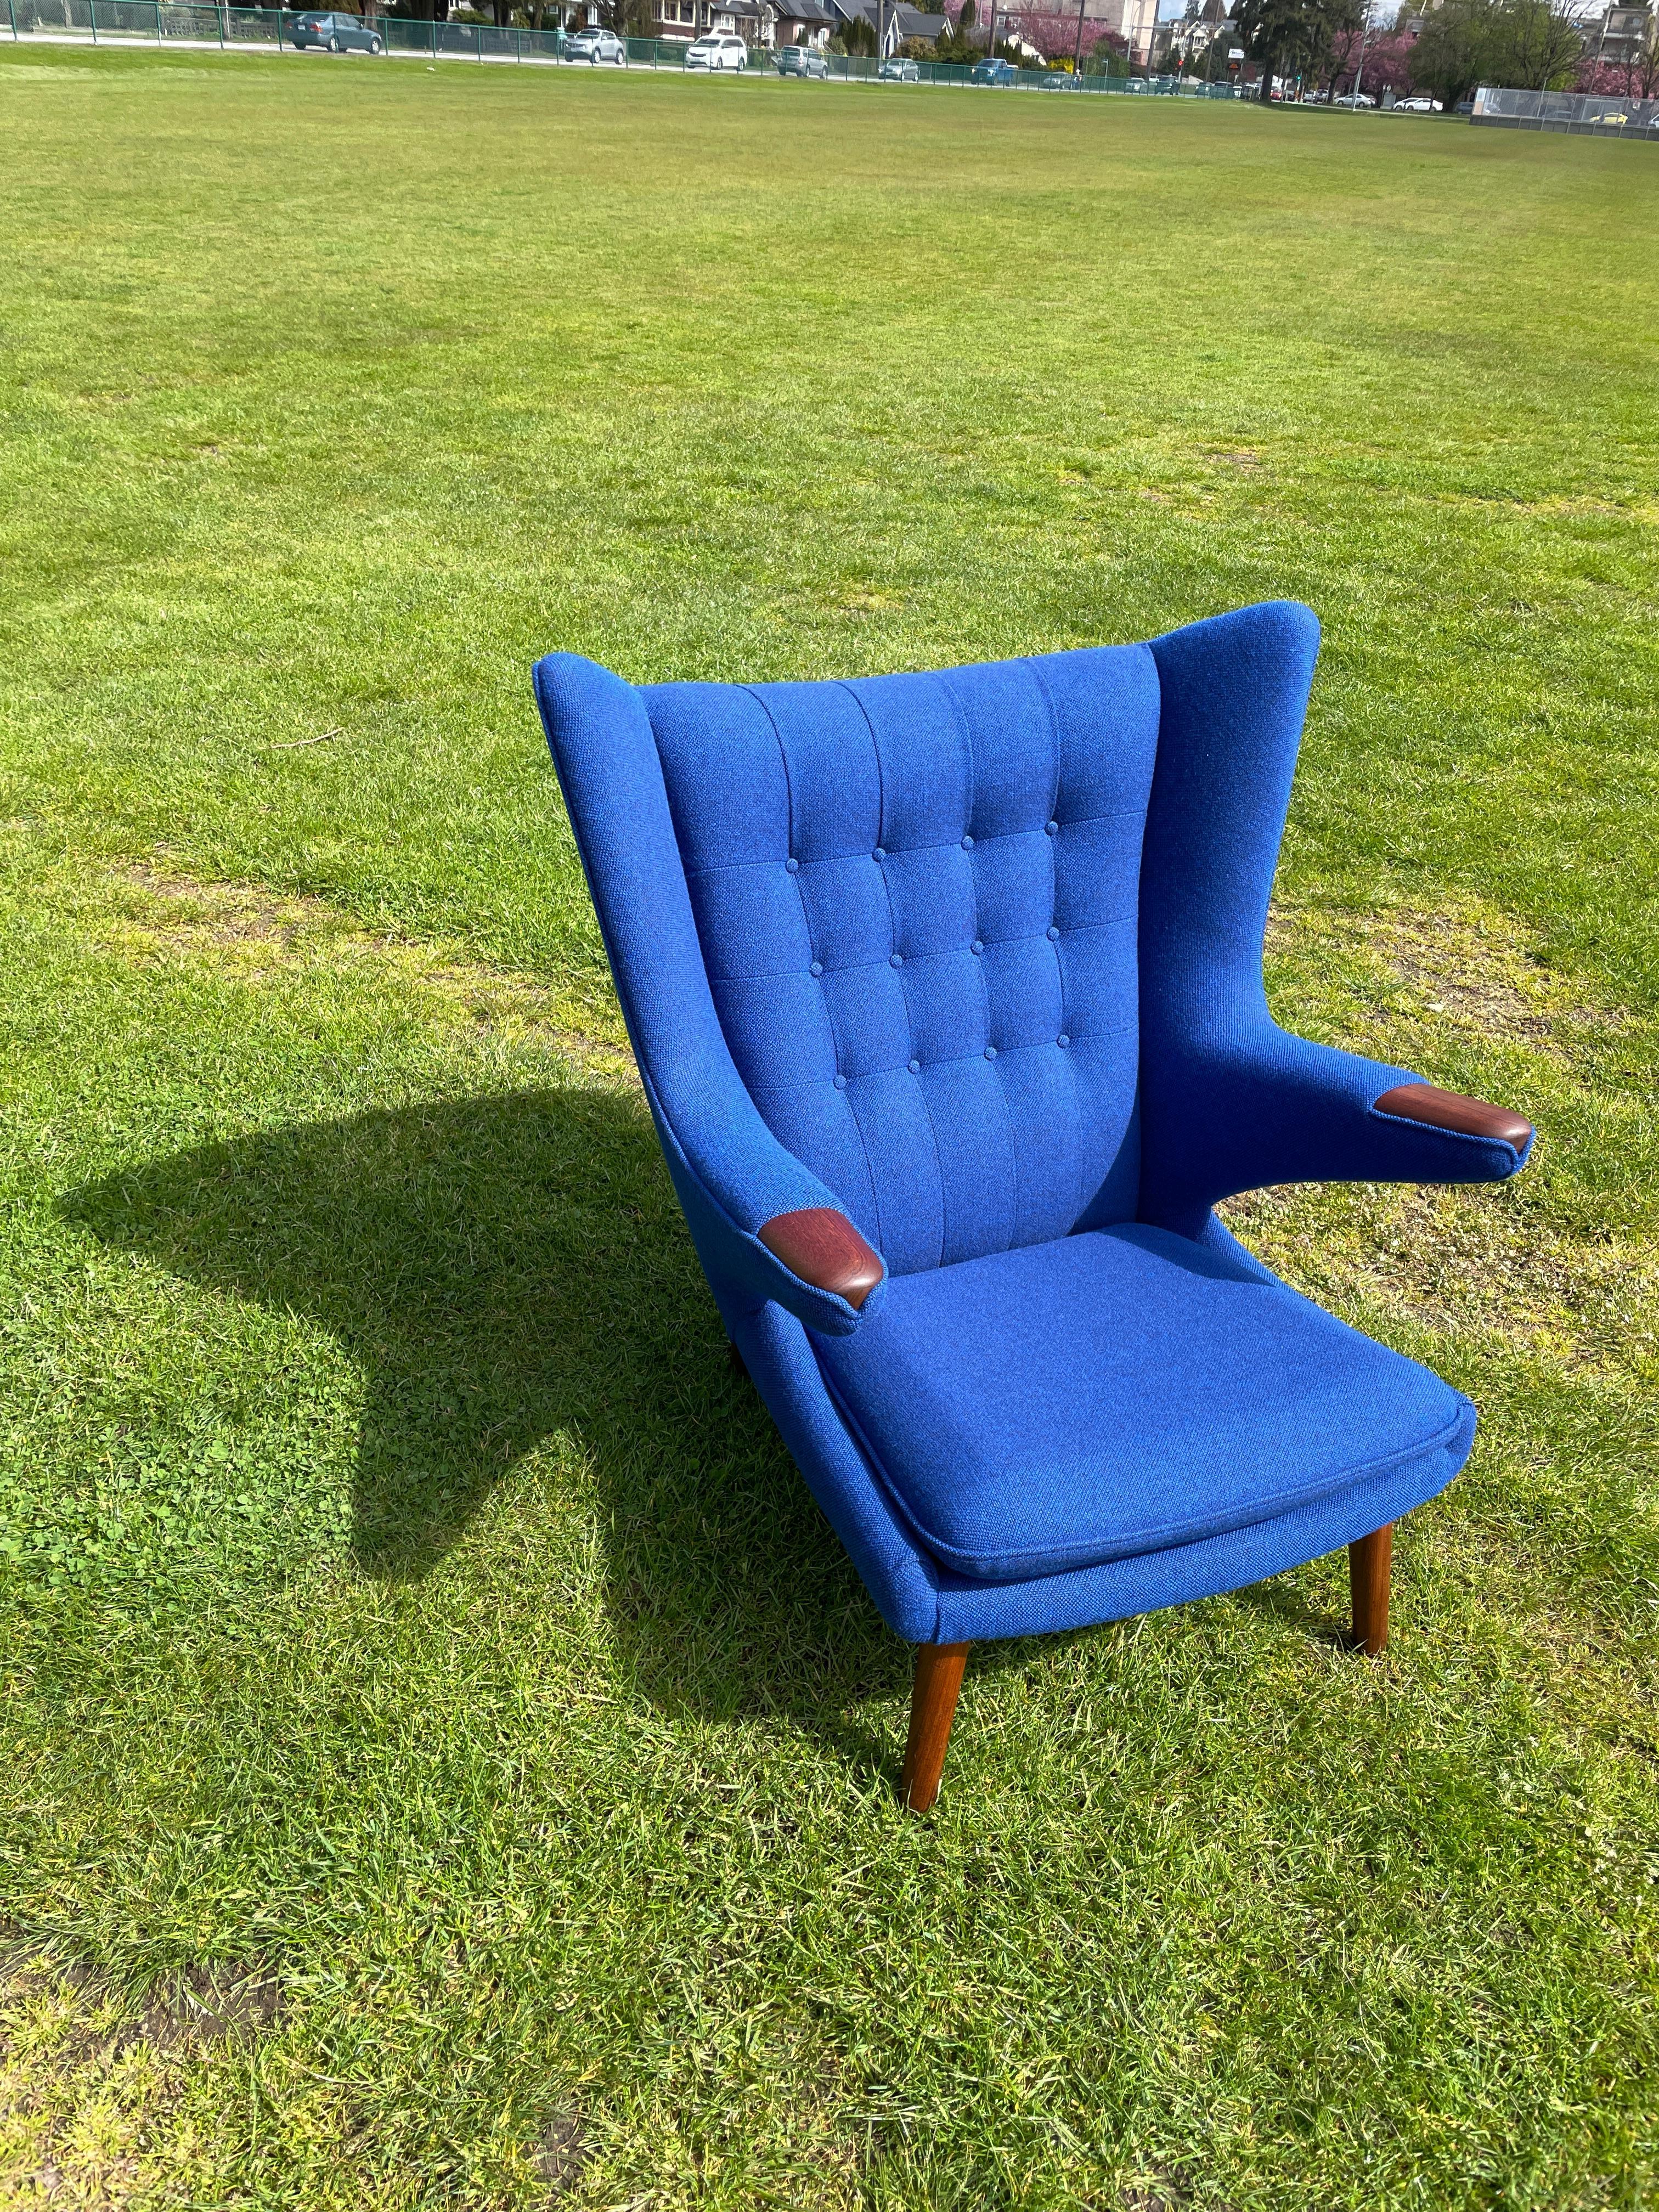 Mid-Century Modern Iconic Papa Bear Chair Designed by Hans J. Wegner for A.P. Stolen. For Sale